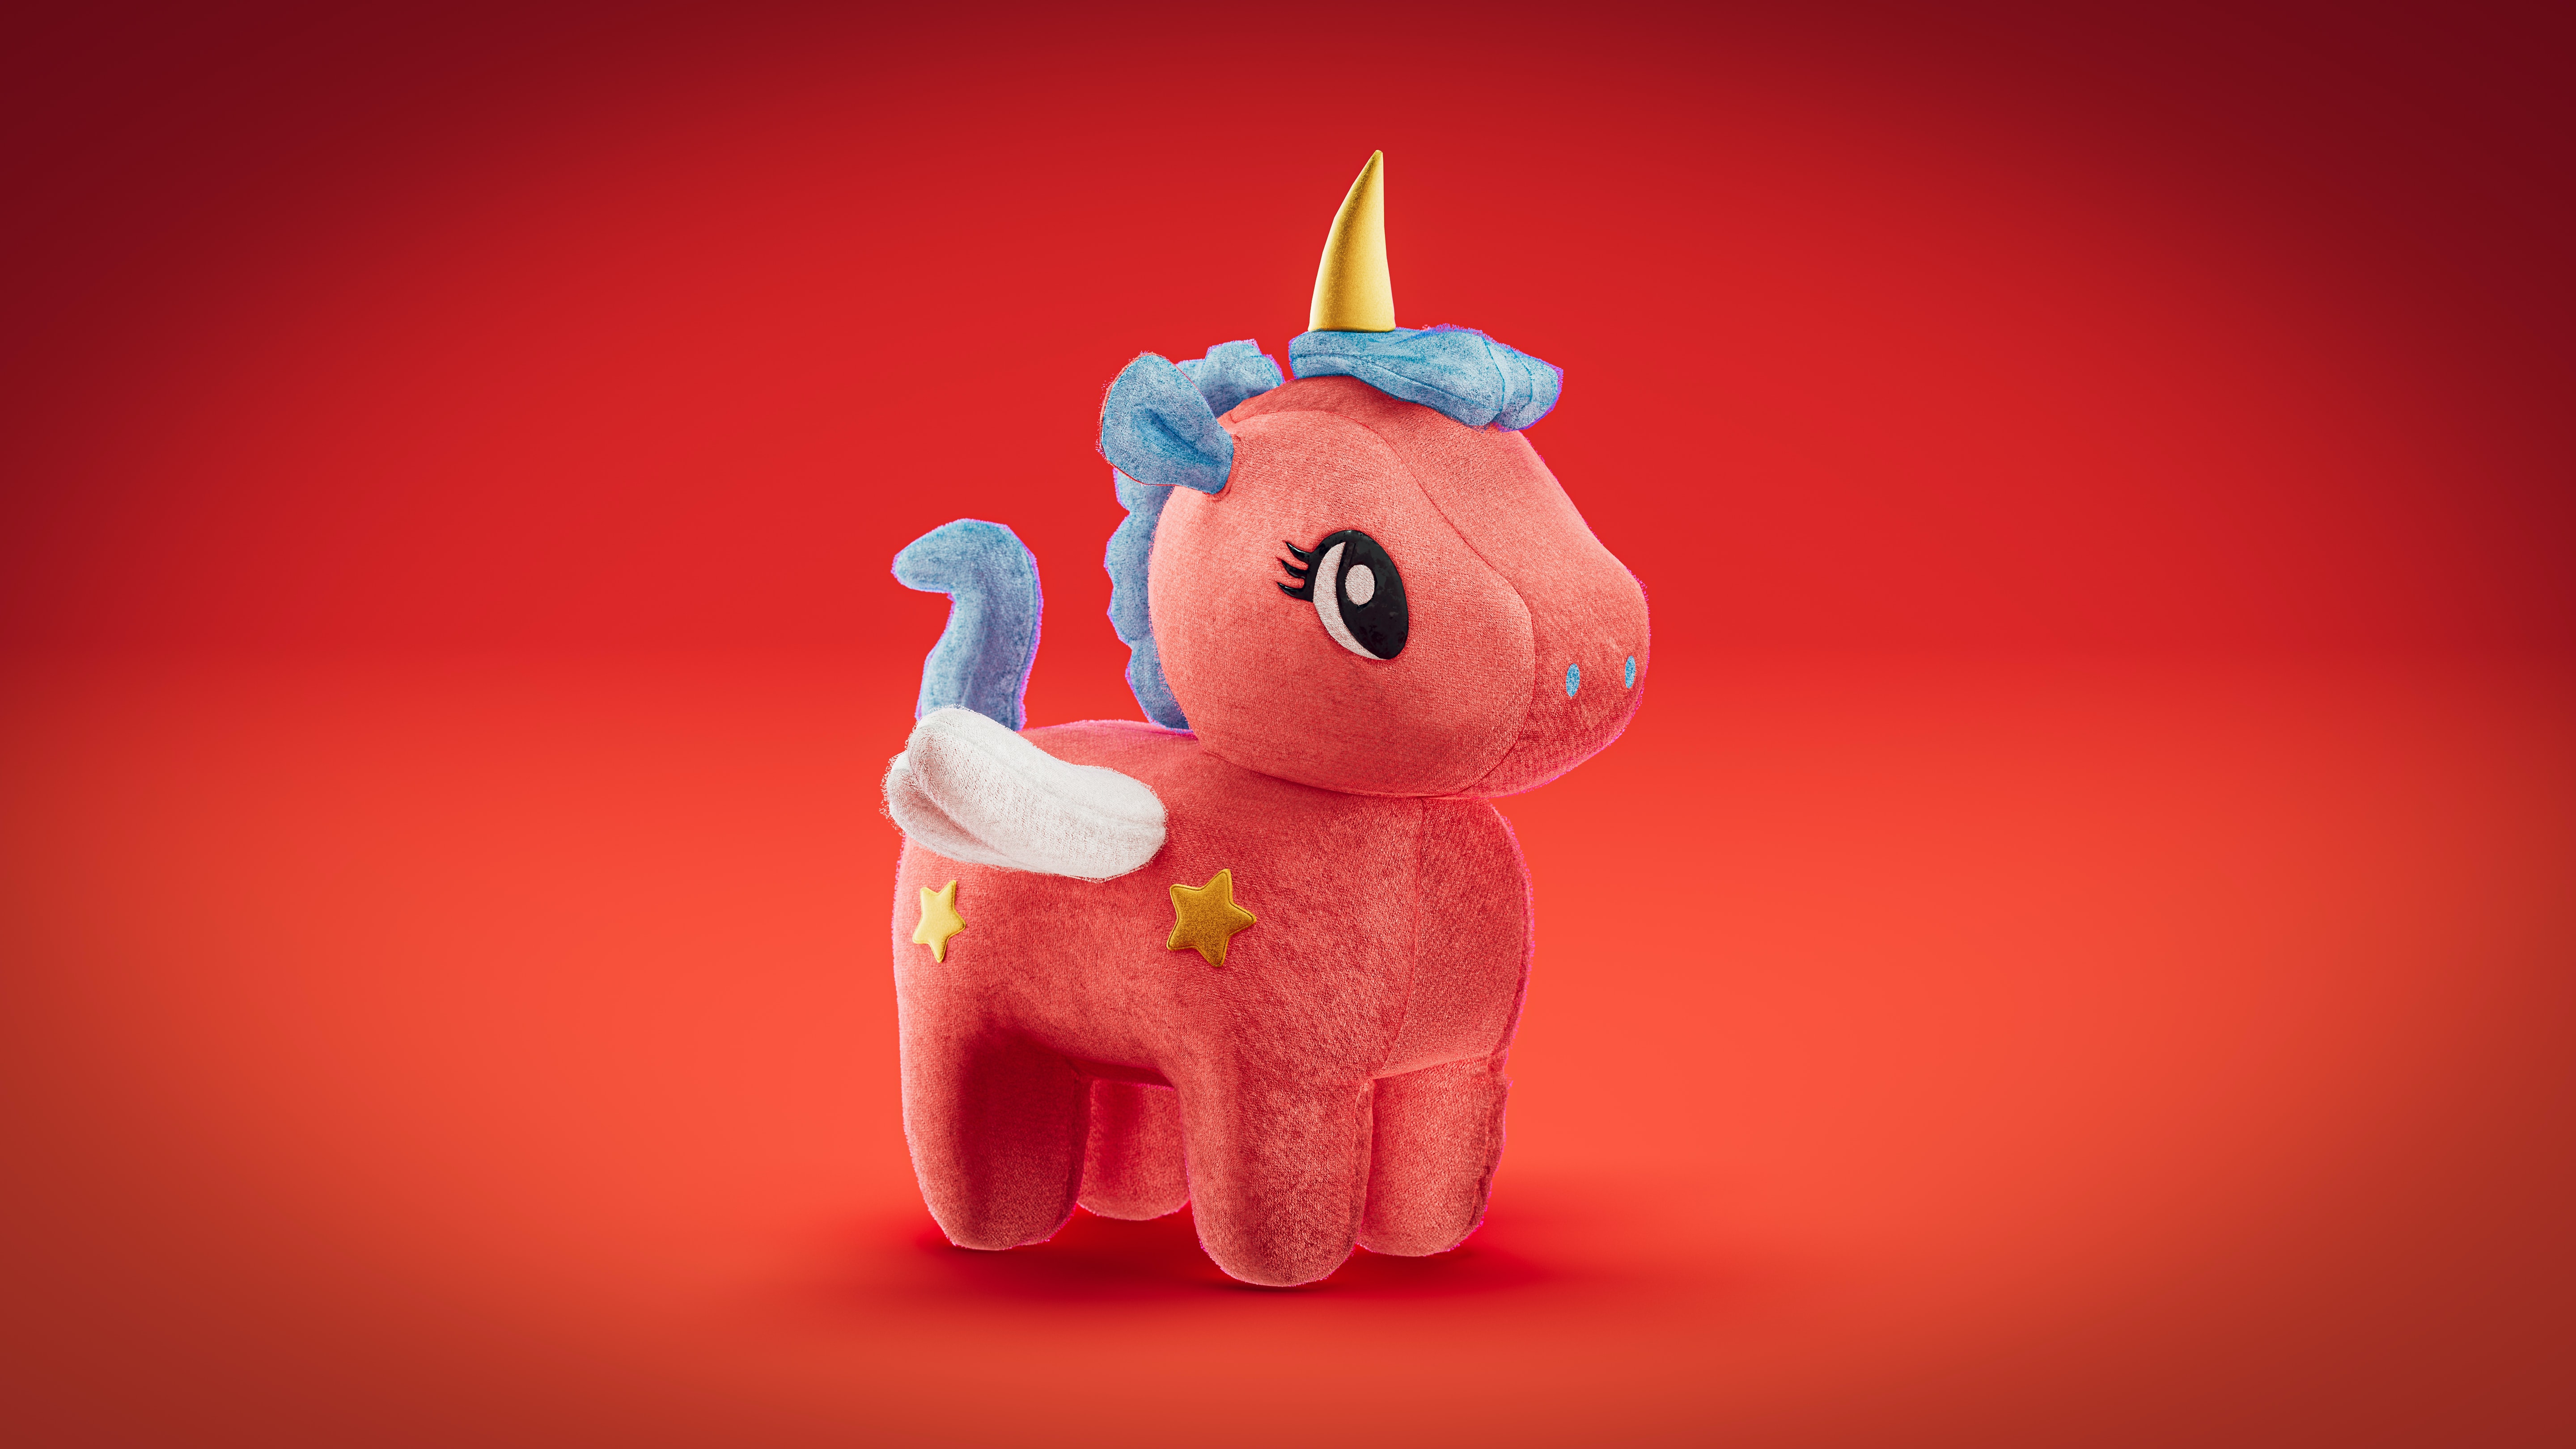 Everyone wants a unicorn.  But how to make it?